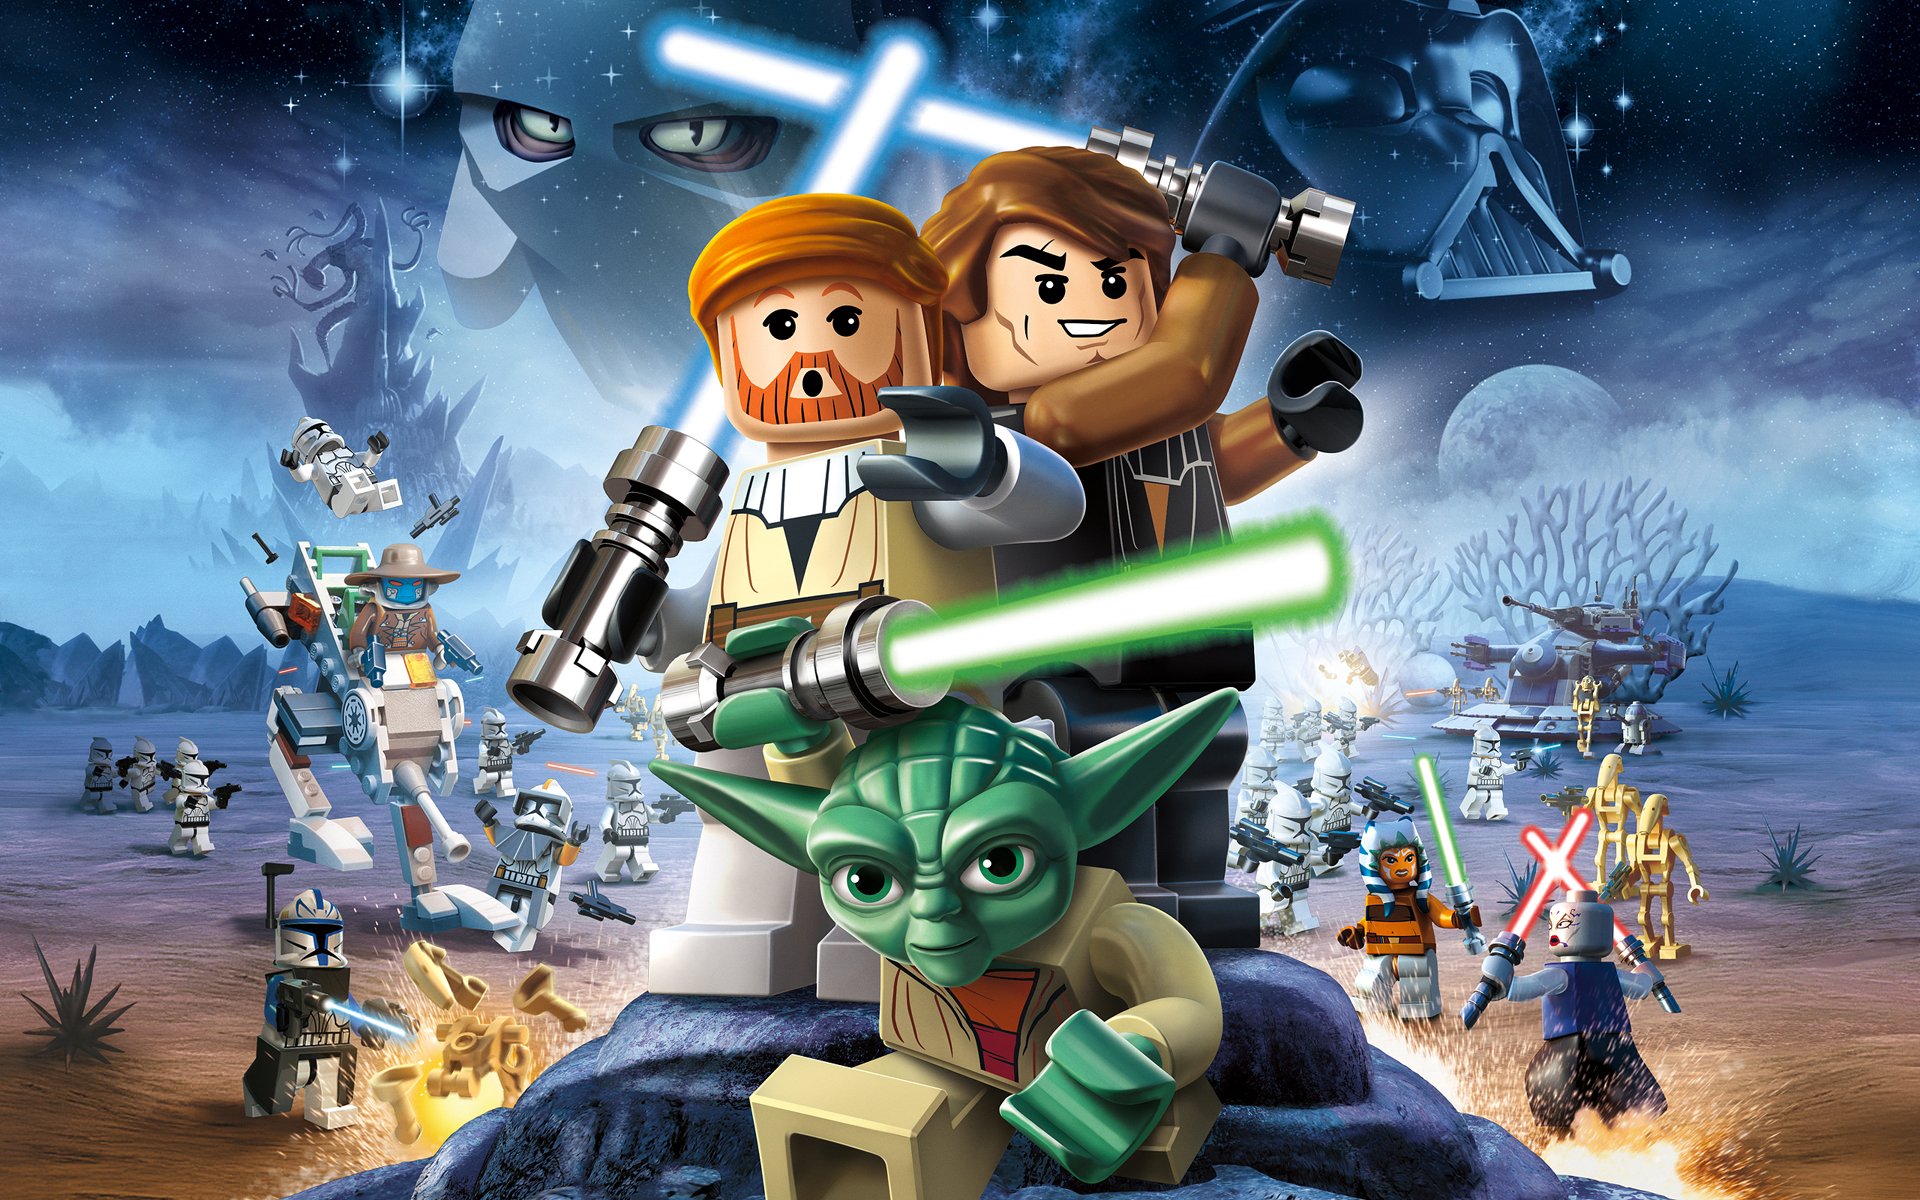 Image - Lego star wars 3 clone wars wallpapers 26835 1920x1200